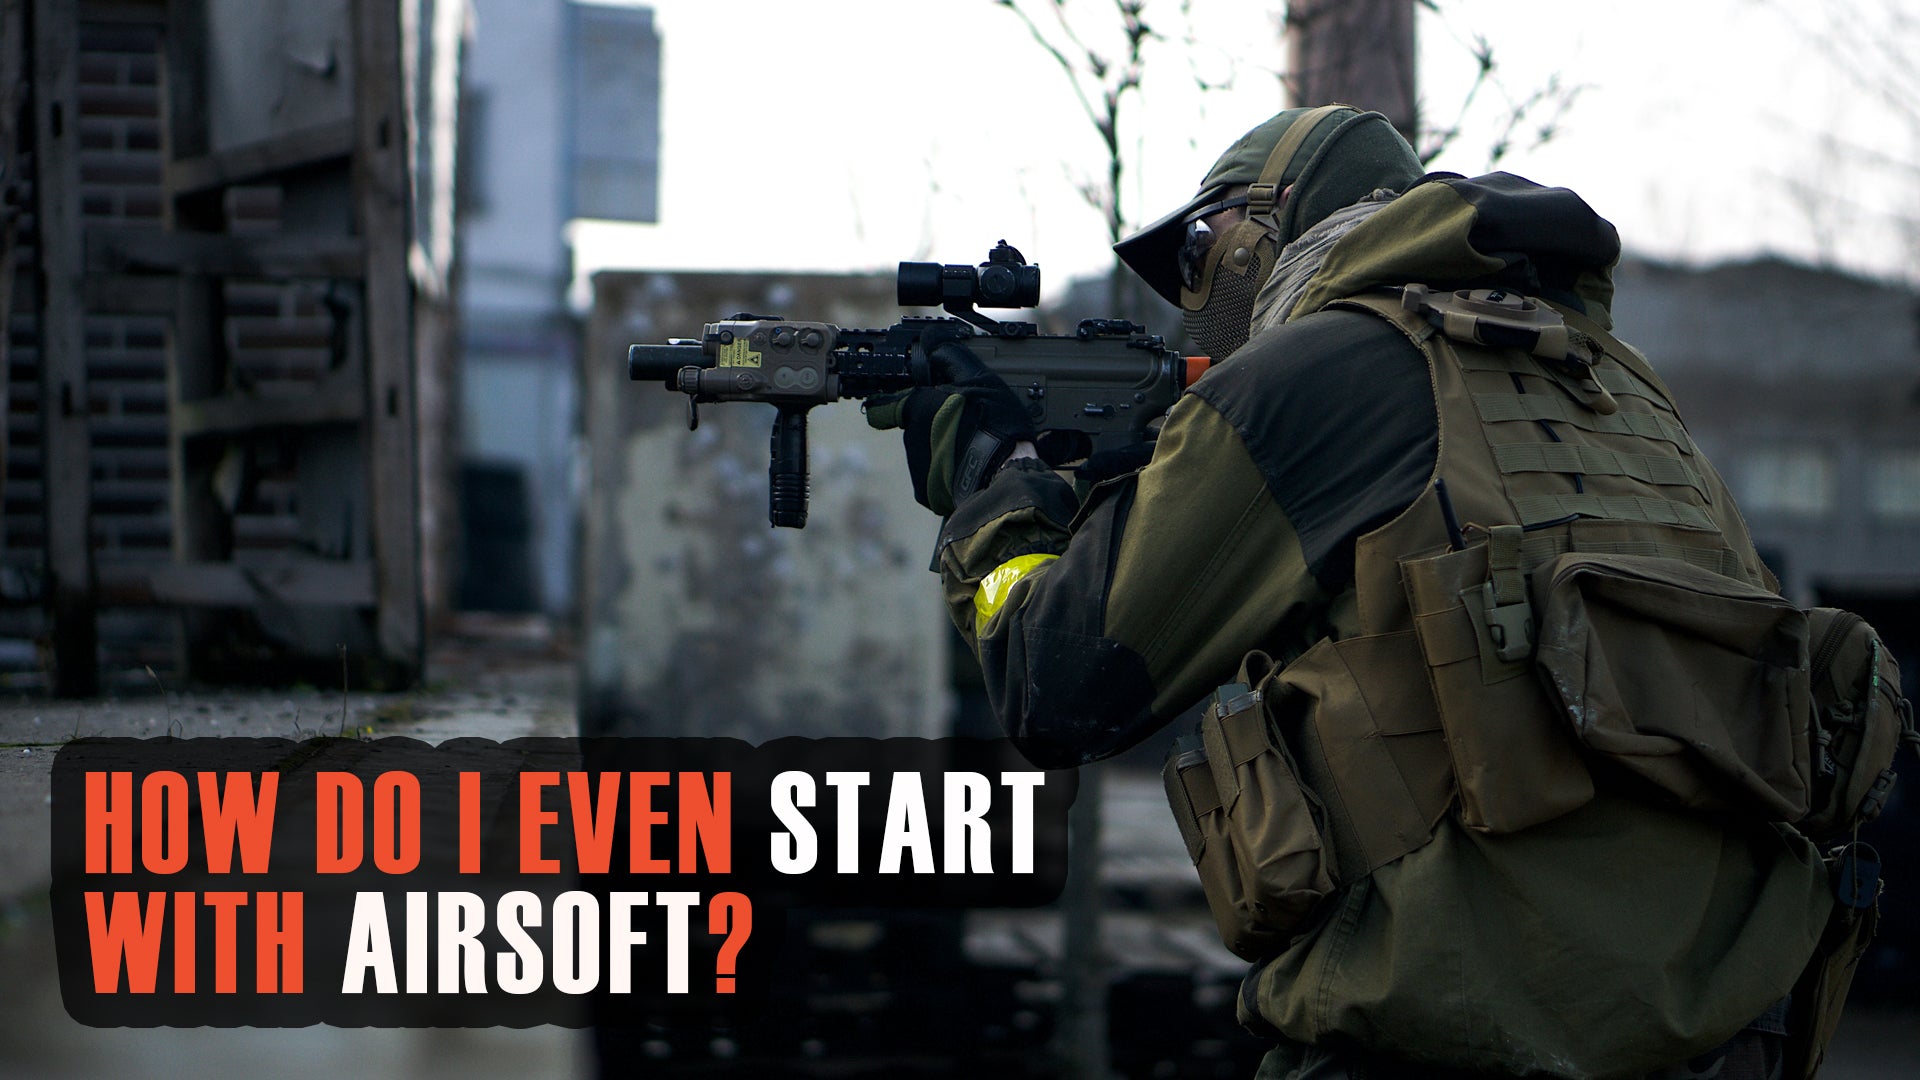 How do I even start with Airsoft?